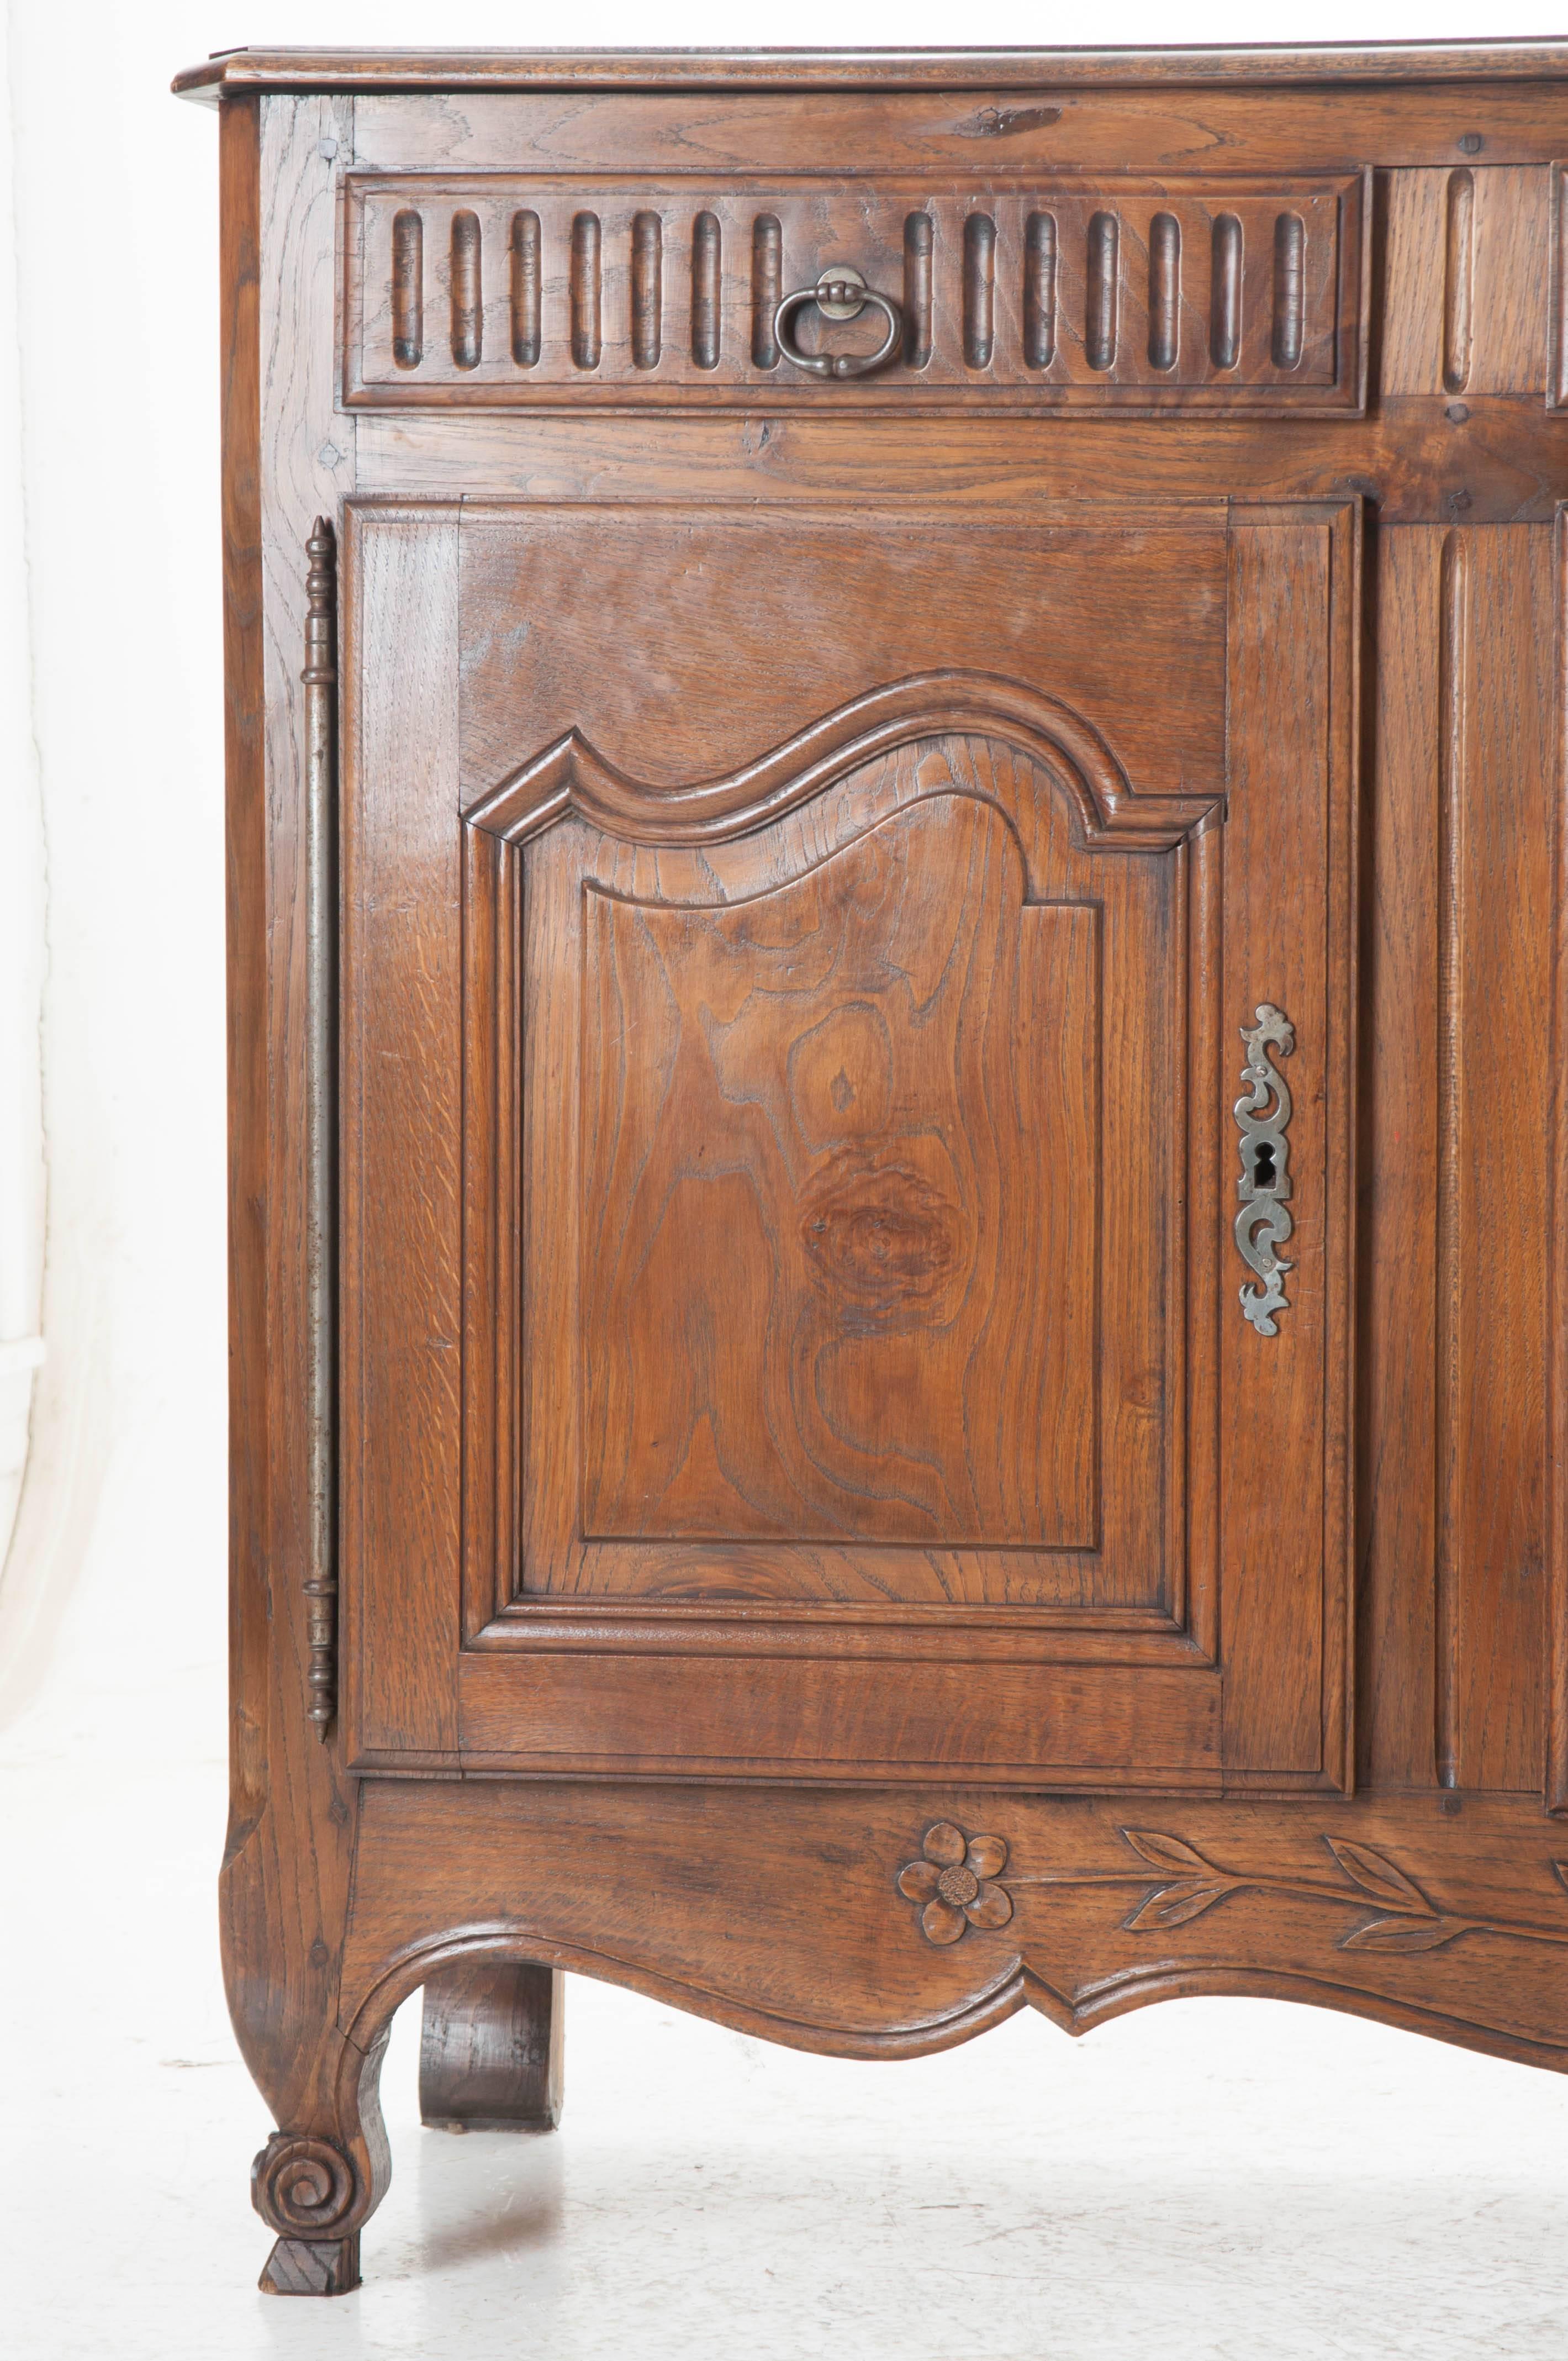 Provincial charm pours from this fabulous French oak three door enfilade. Made in 1880, this transitional piece combines elements of both Louis XV and XVI styles. Three drawers, bedecked with fluted carvings and original pulls are set above three